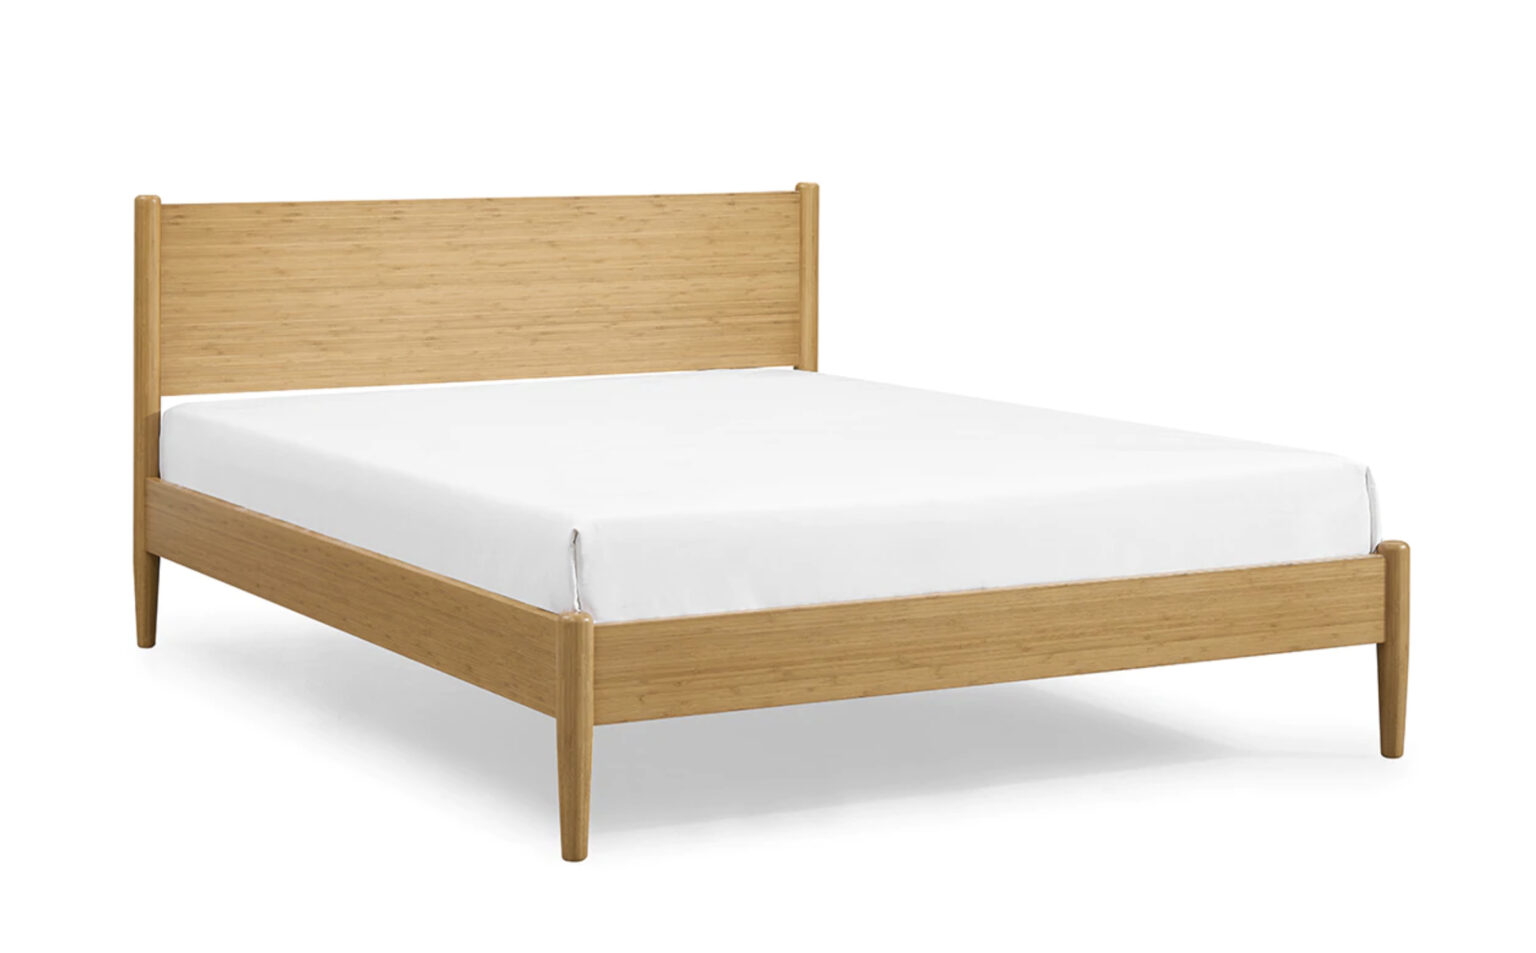 Ria-Platform-Bed-Caramelized-Bamboo-angle-view